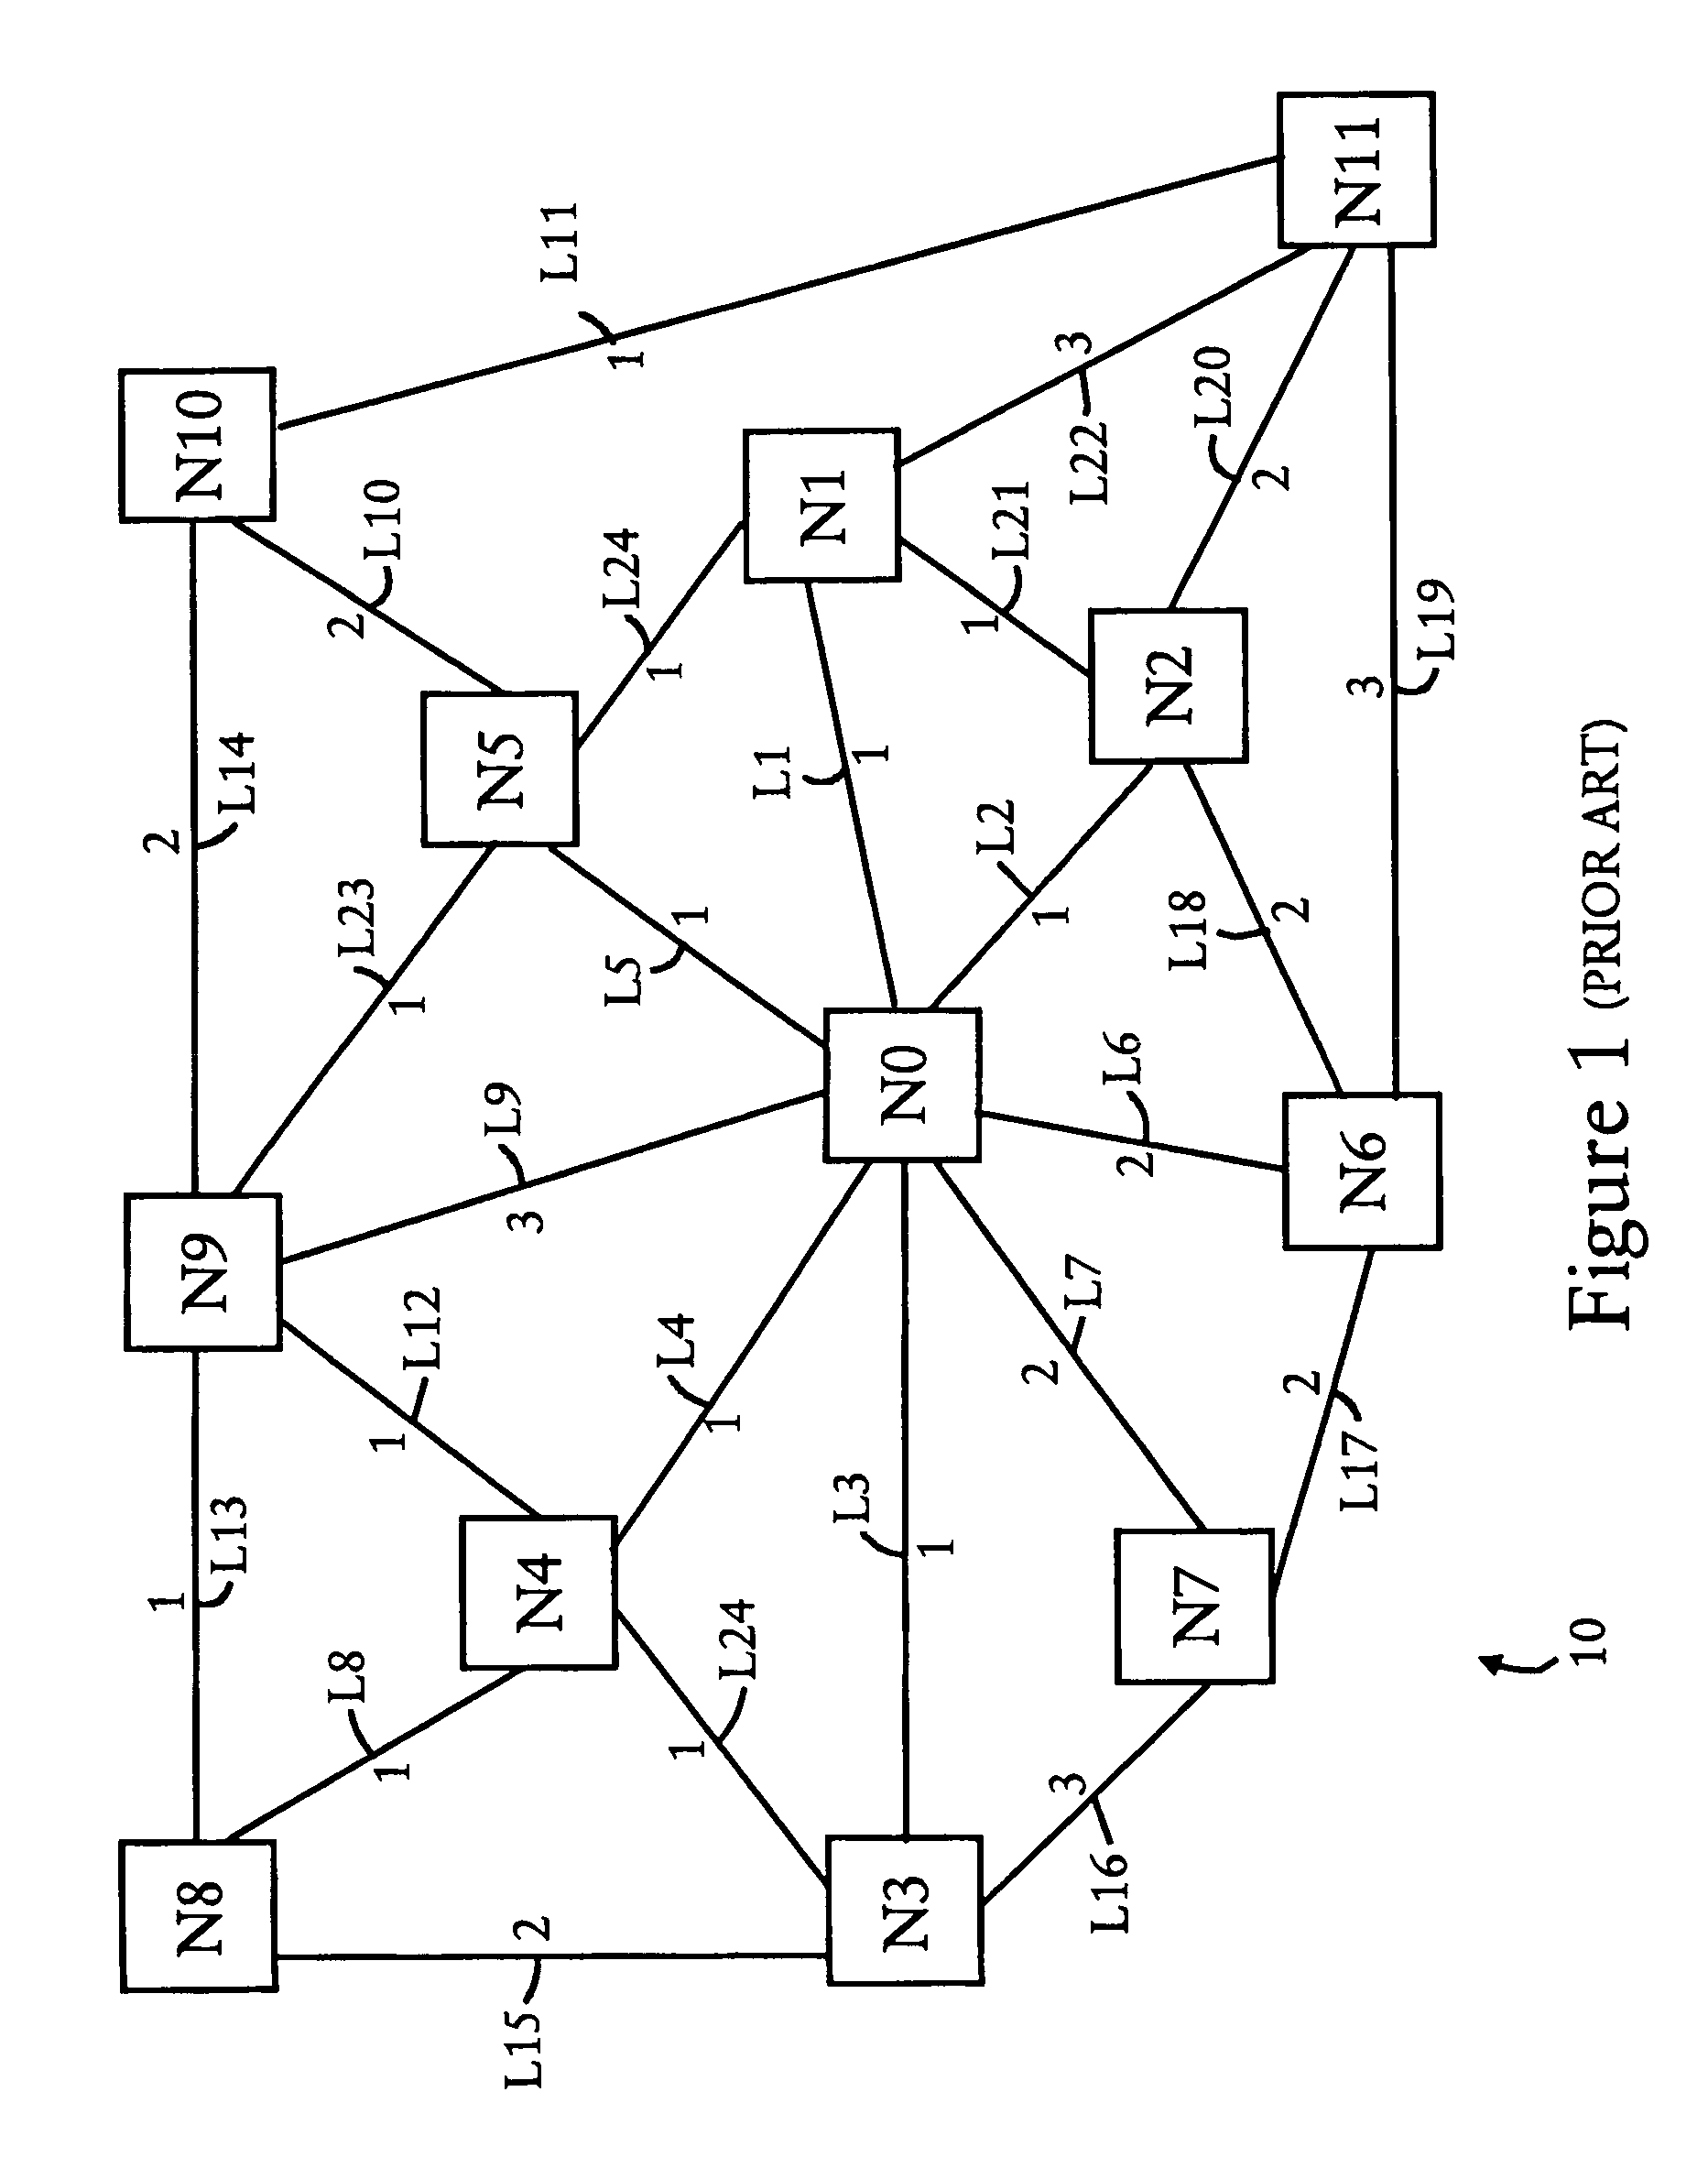 Directed acyclic graph computation by orienting shortest path links and alternate path links obtained from shortest path computation